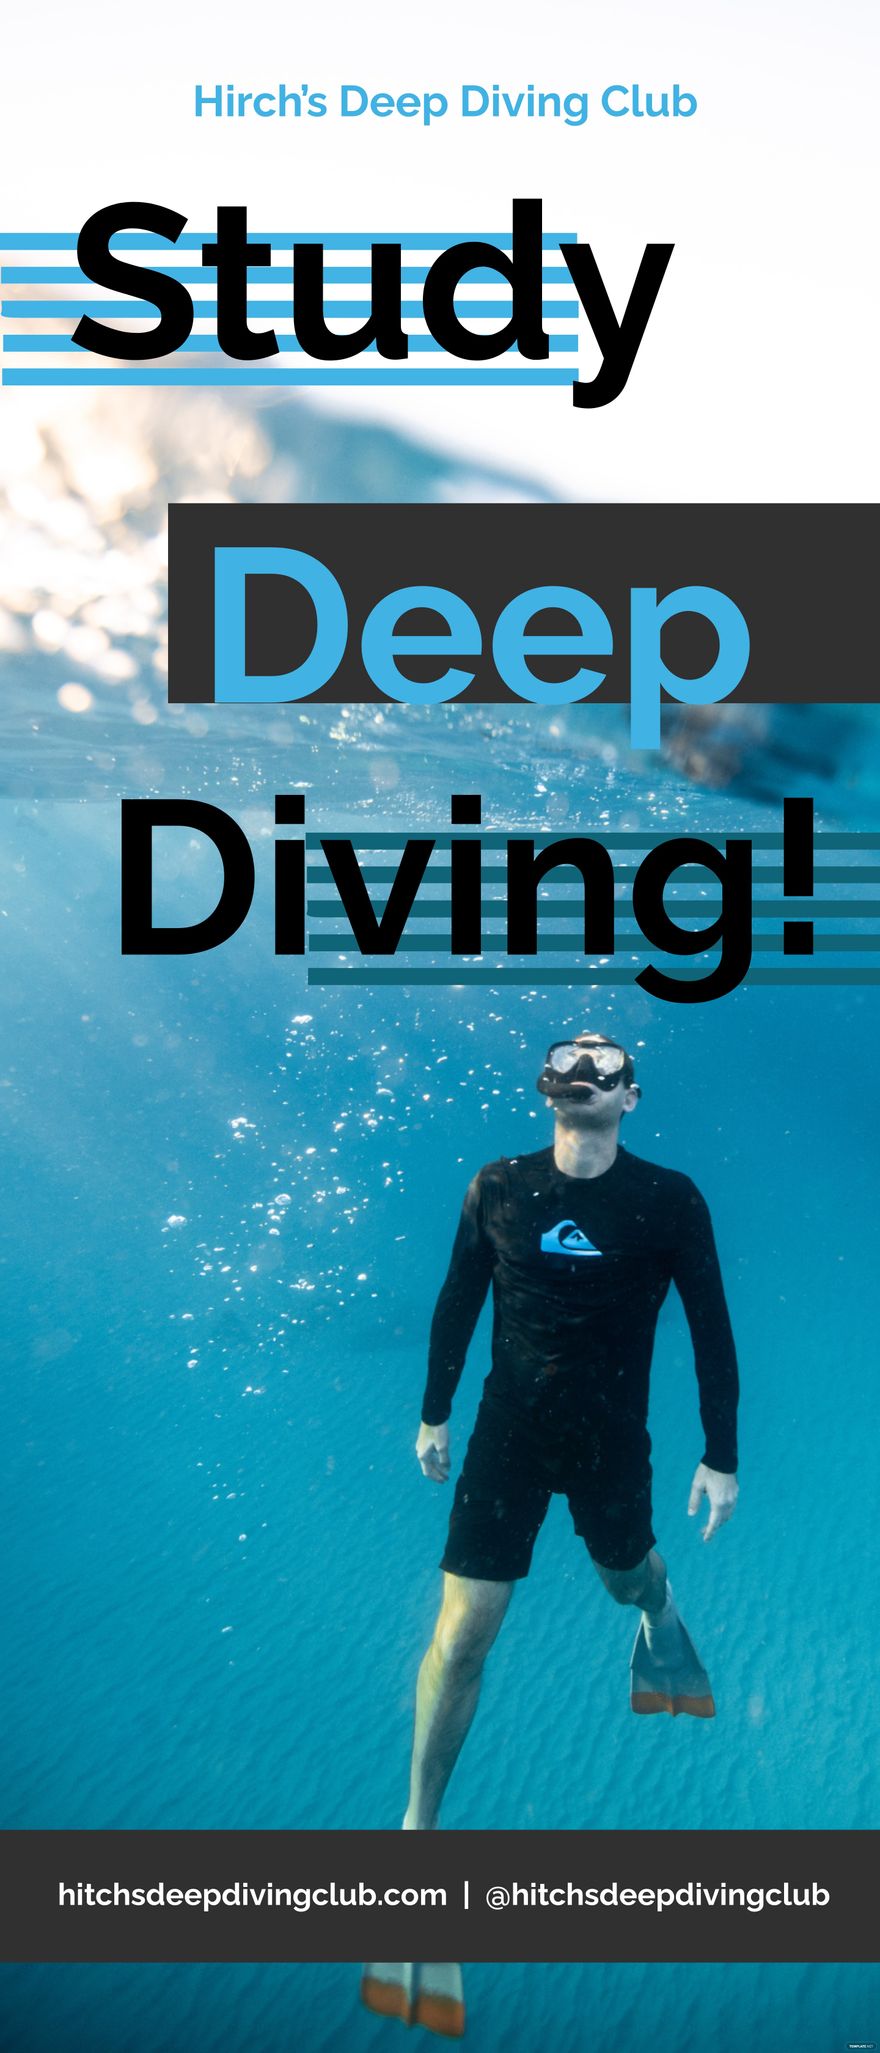 Free Deep Diving Club Rollup Banner Template